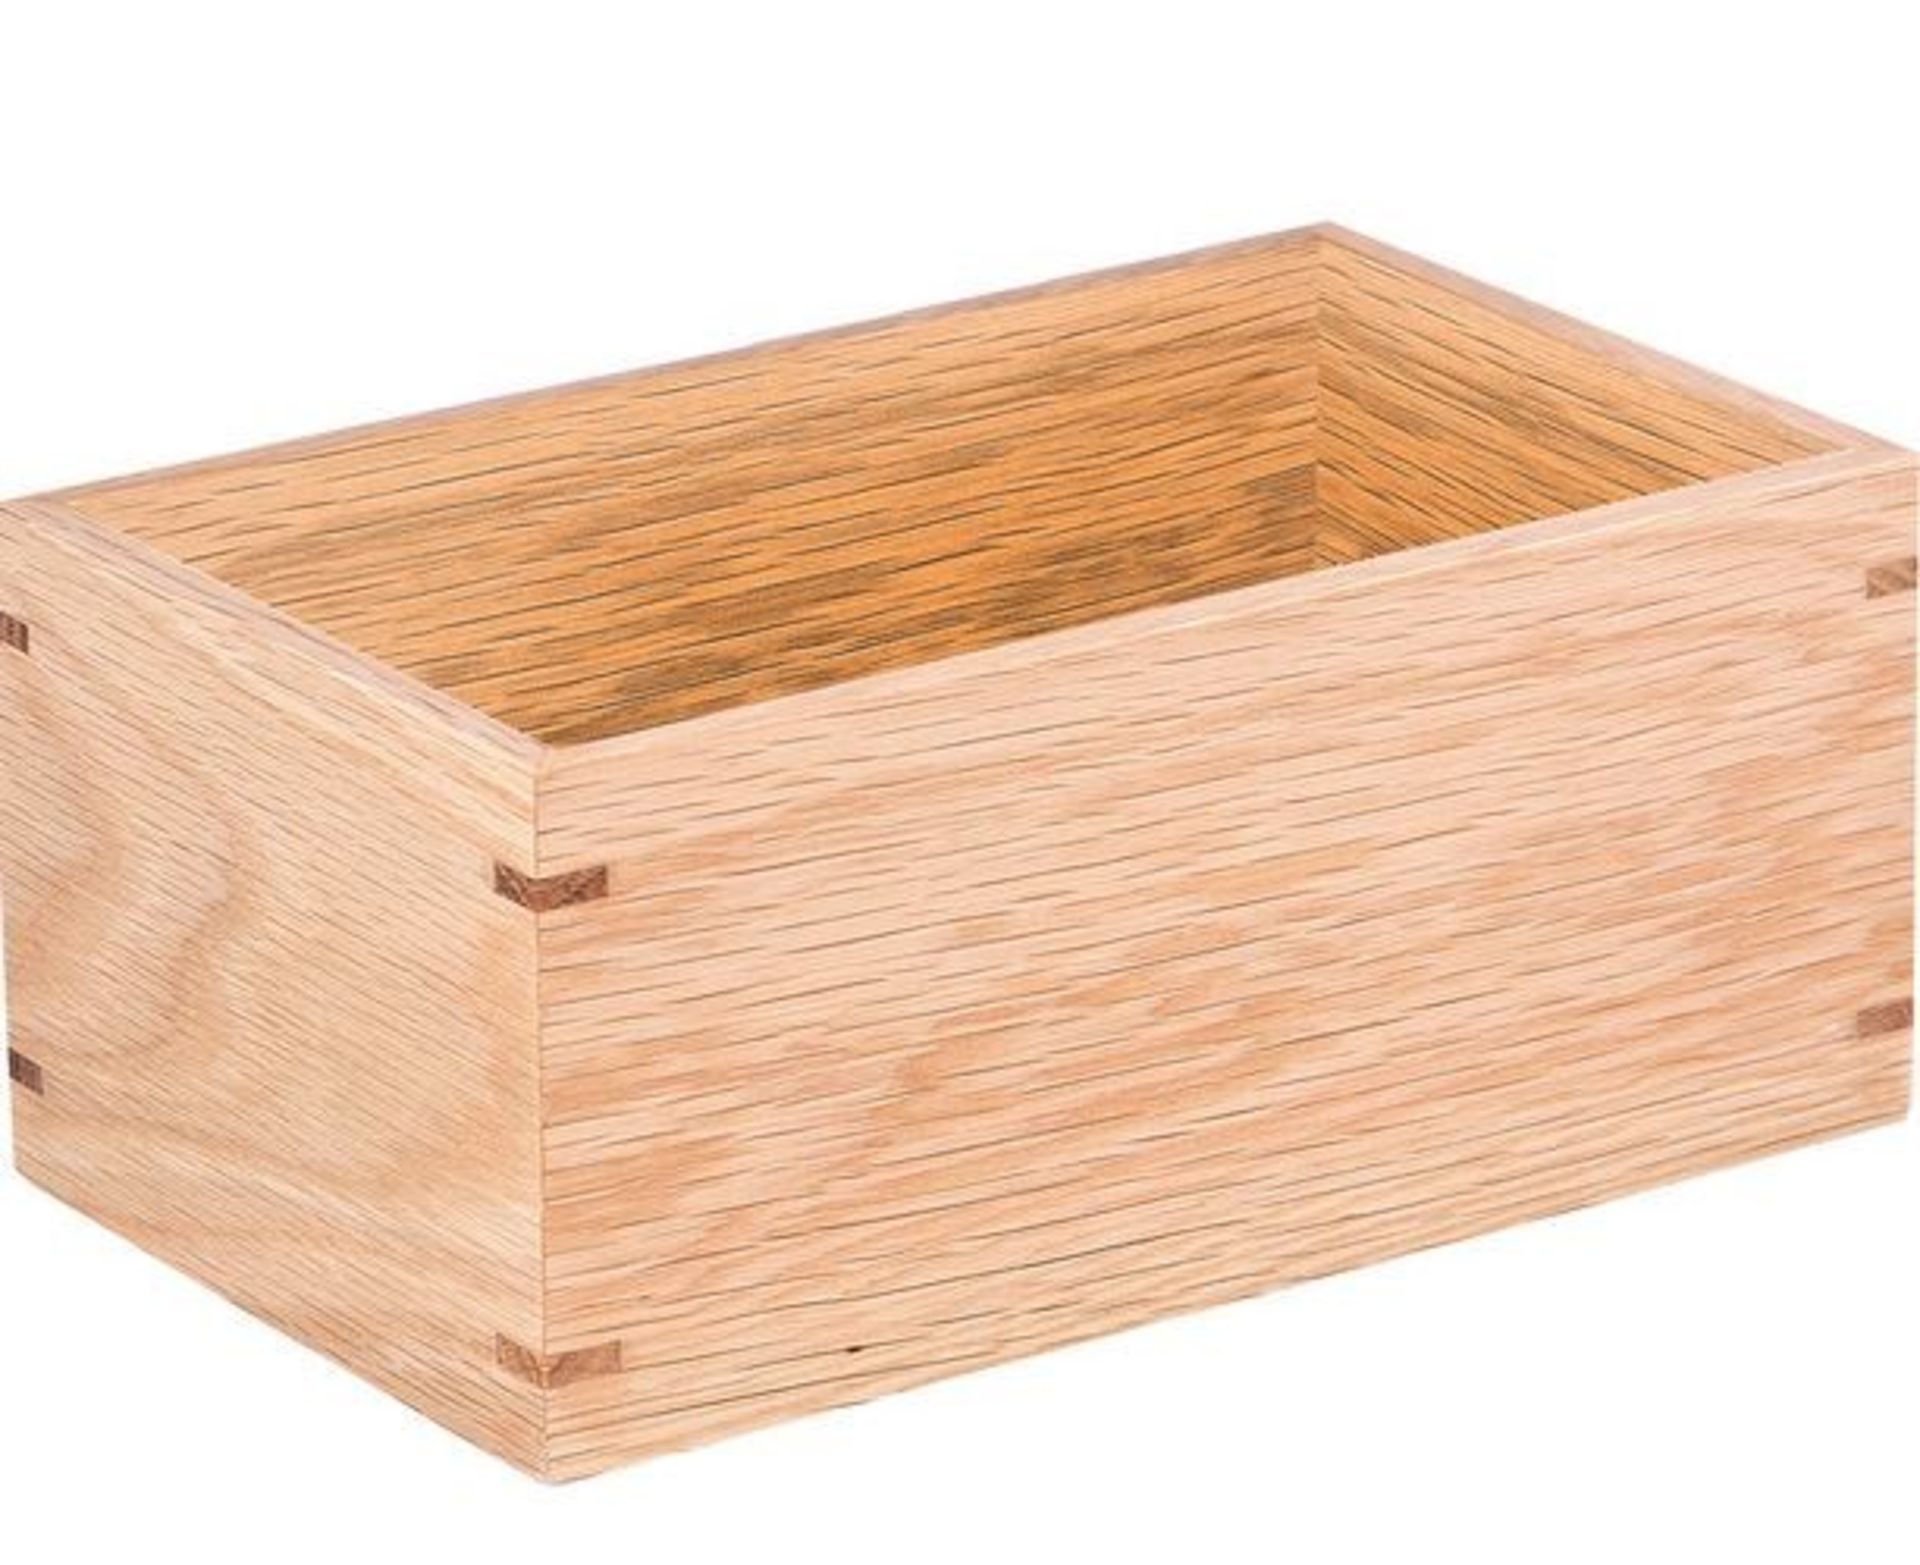 1 GRADE A BOXED MEZZA NATURAL OAK STORAGE BOX / RRP £31.00 (VIEWING HIGHLY RECOMMENDED)